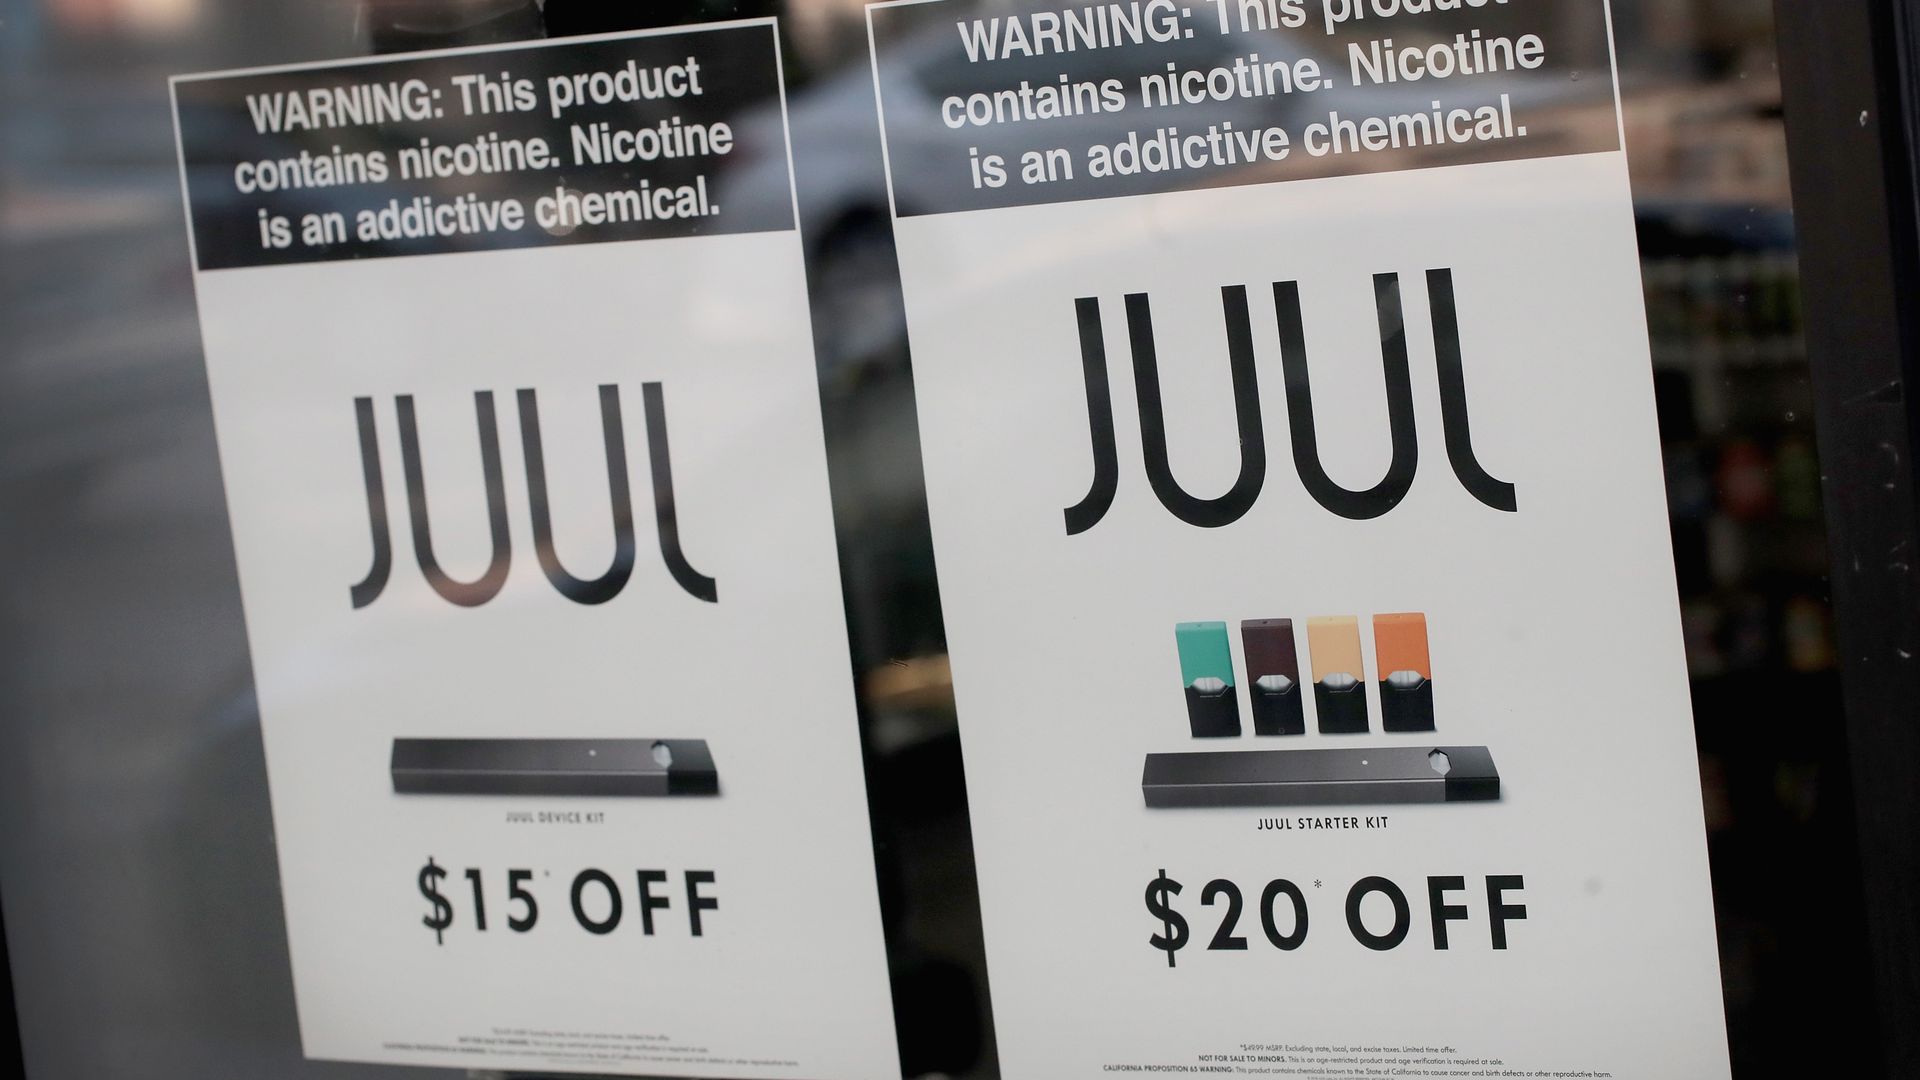 Juul signs at a storefront